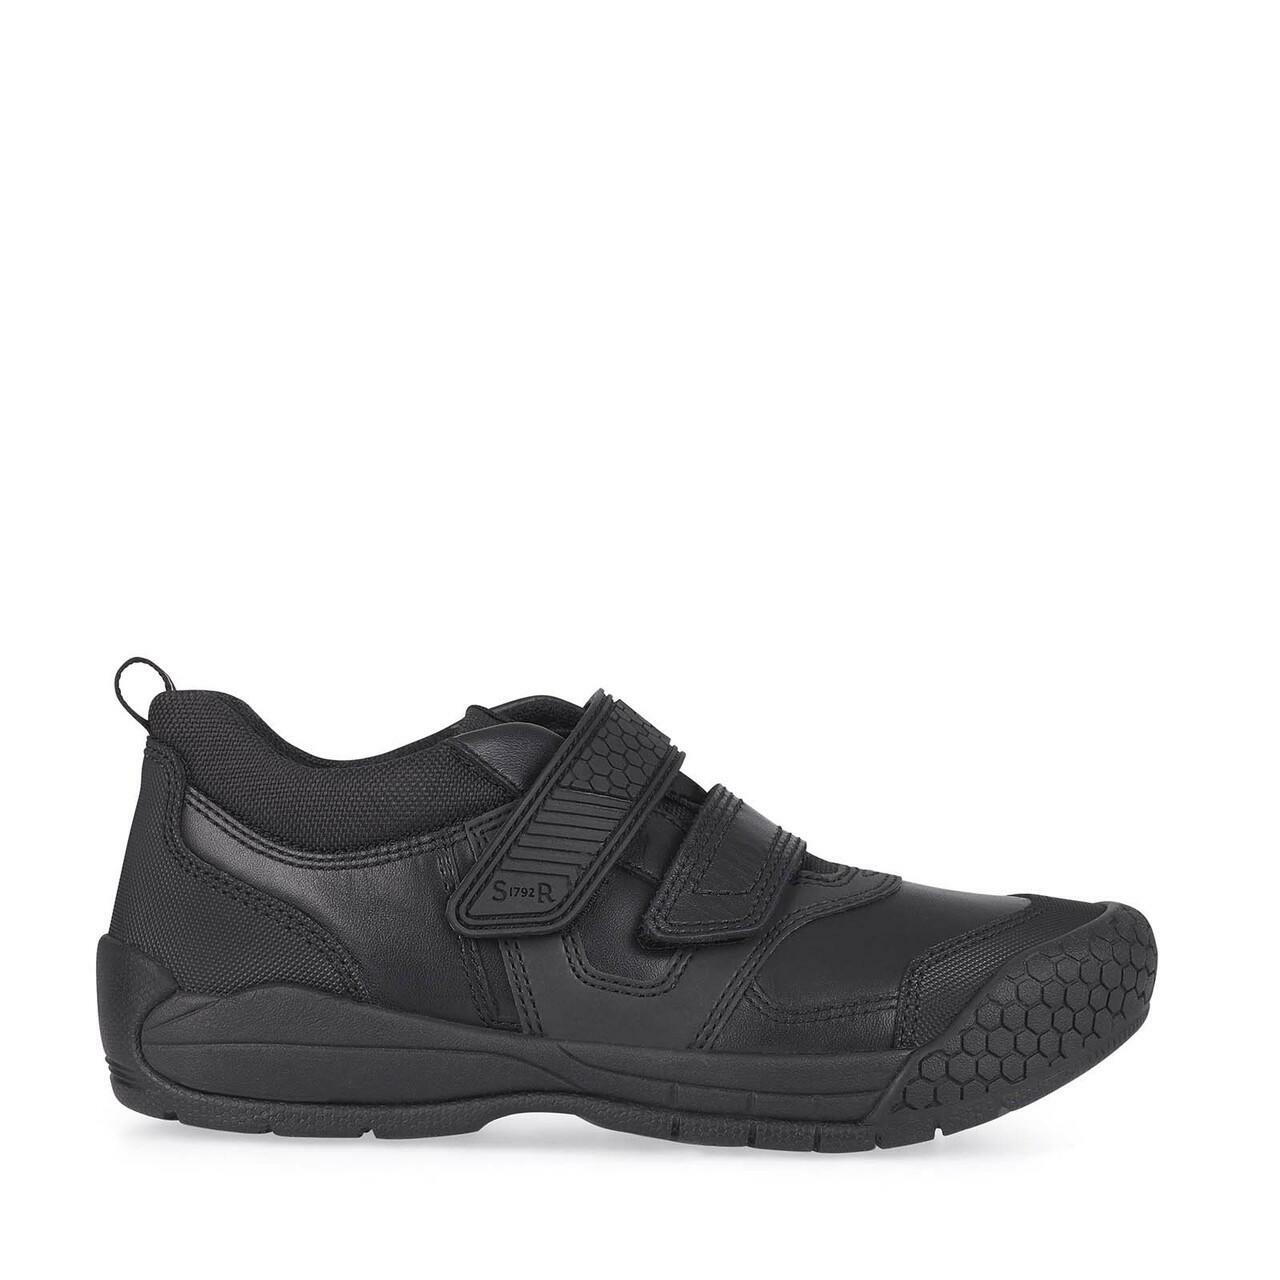 A boys school shoe by Start Rite, style Strike, in black leather with double velcro fastening. Right side view.